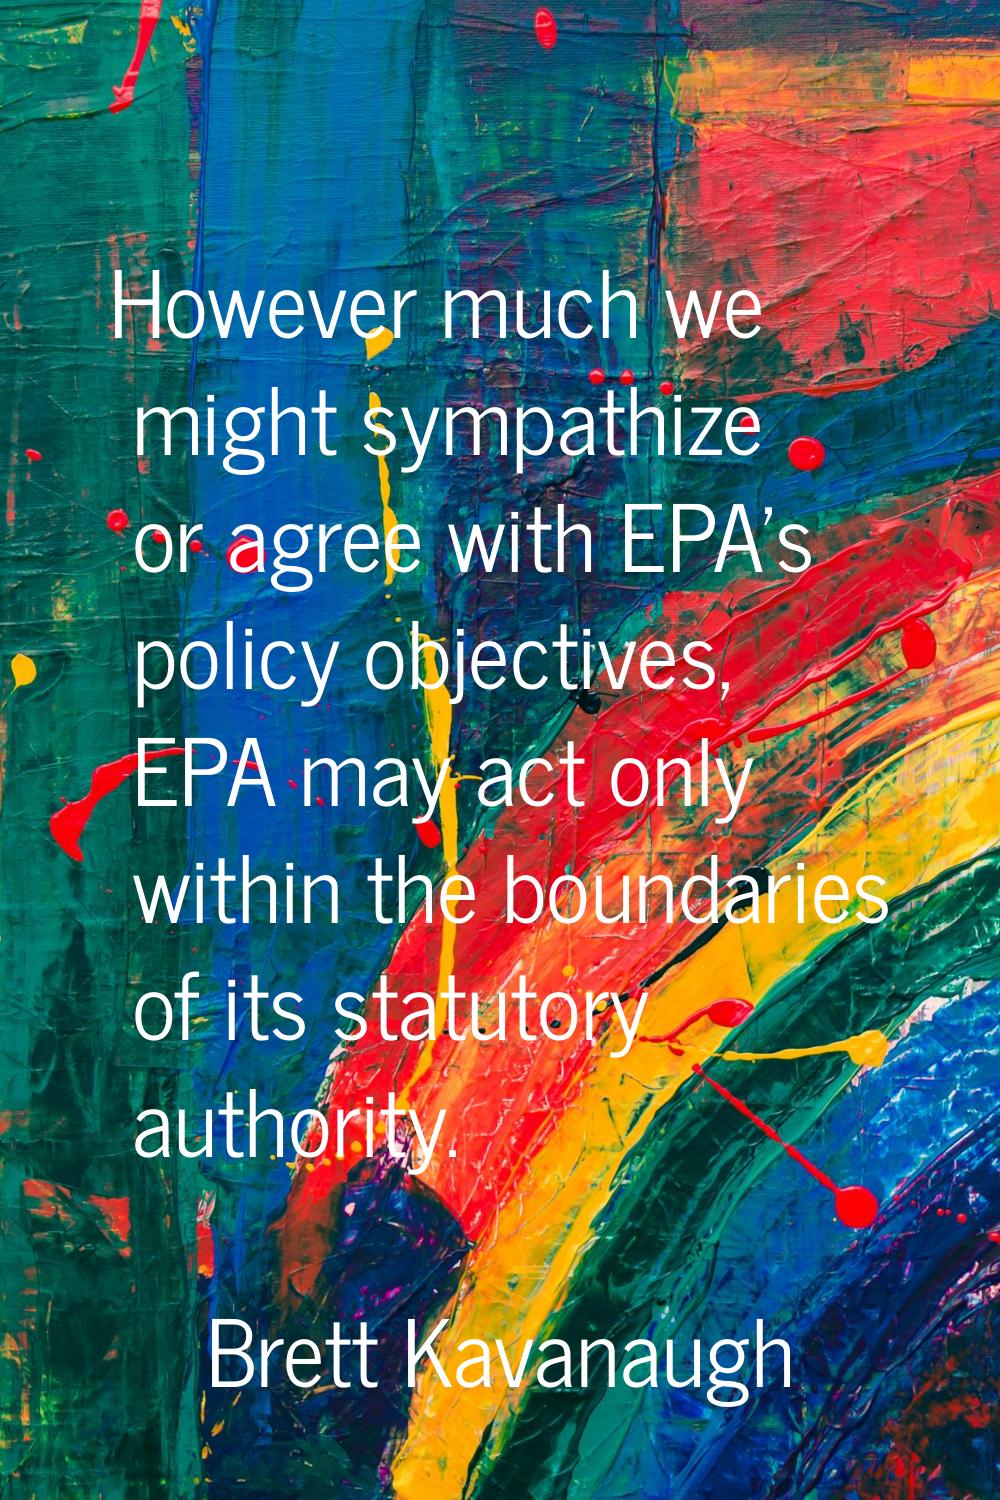 However much we might sympathize or agree with EPA's policy objectives, EPA may act only within the